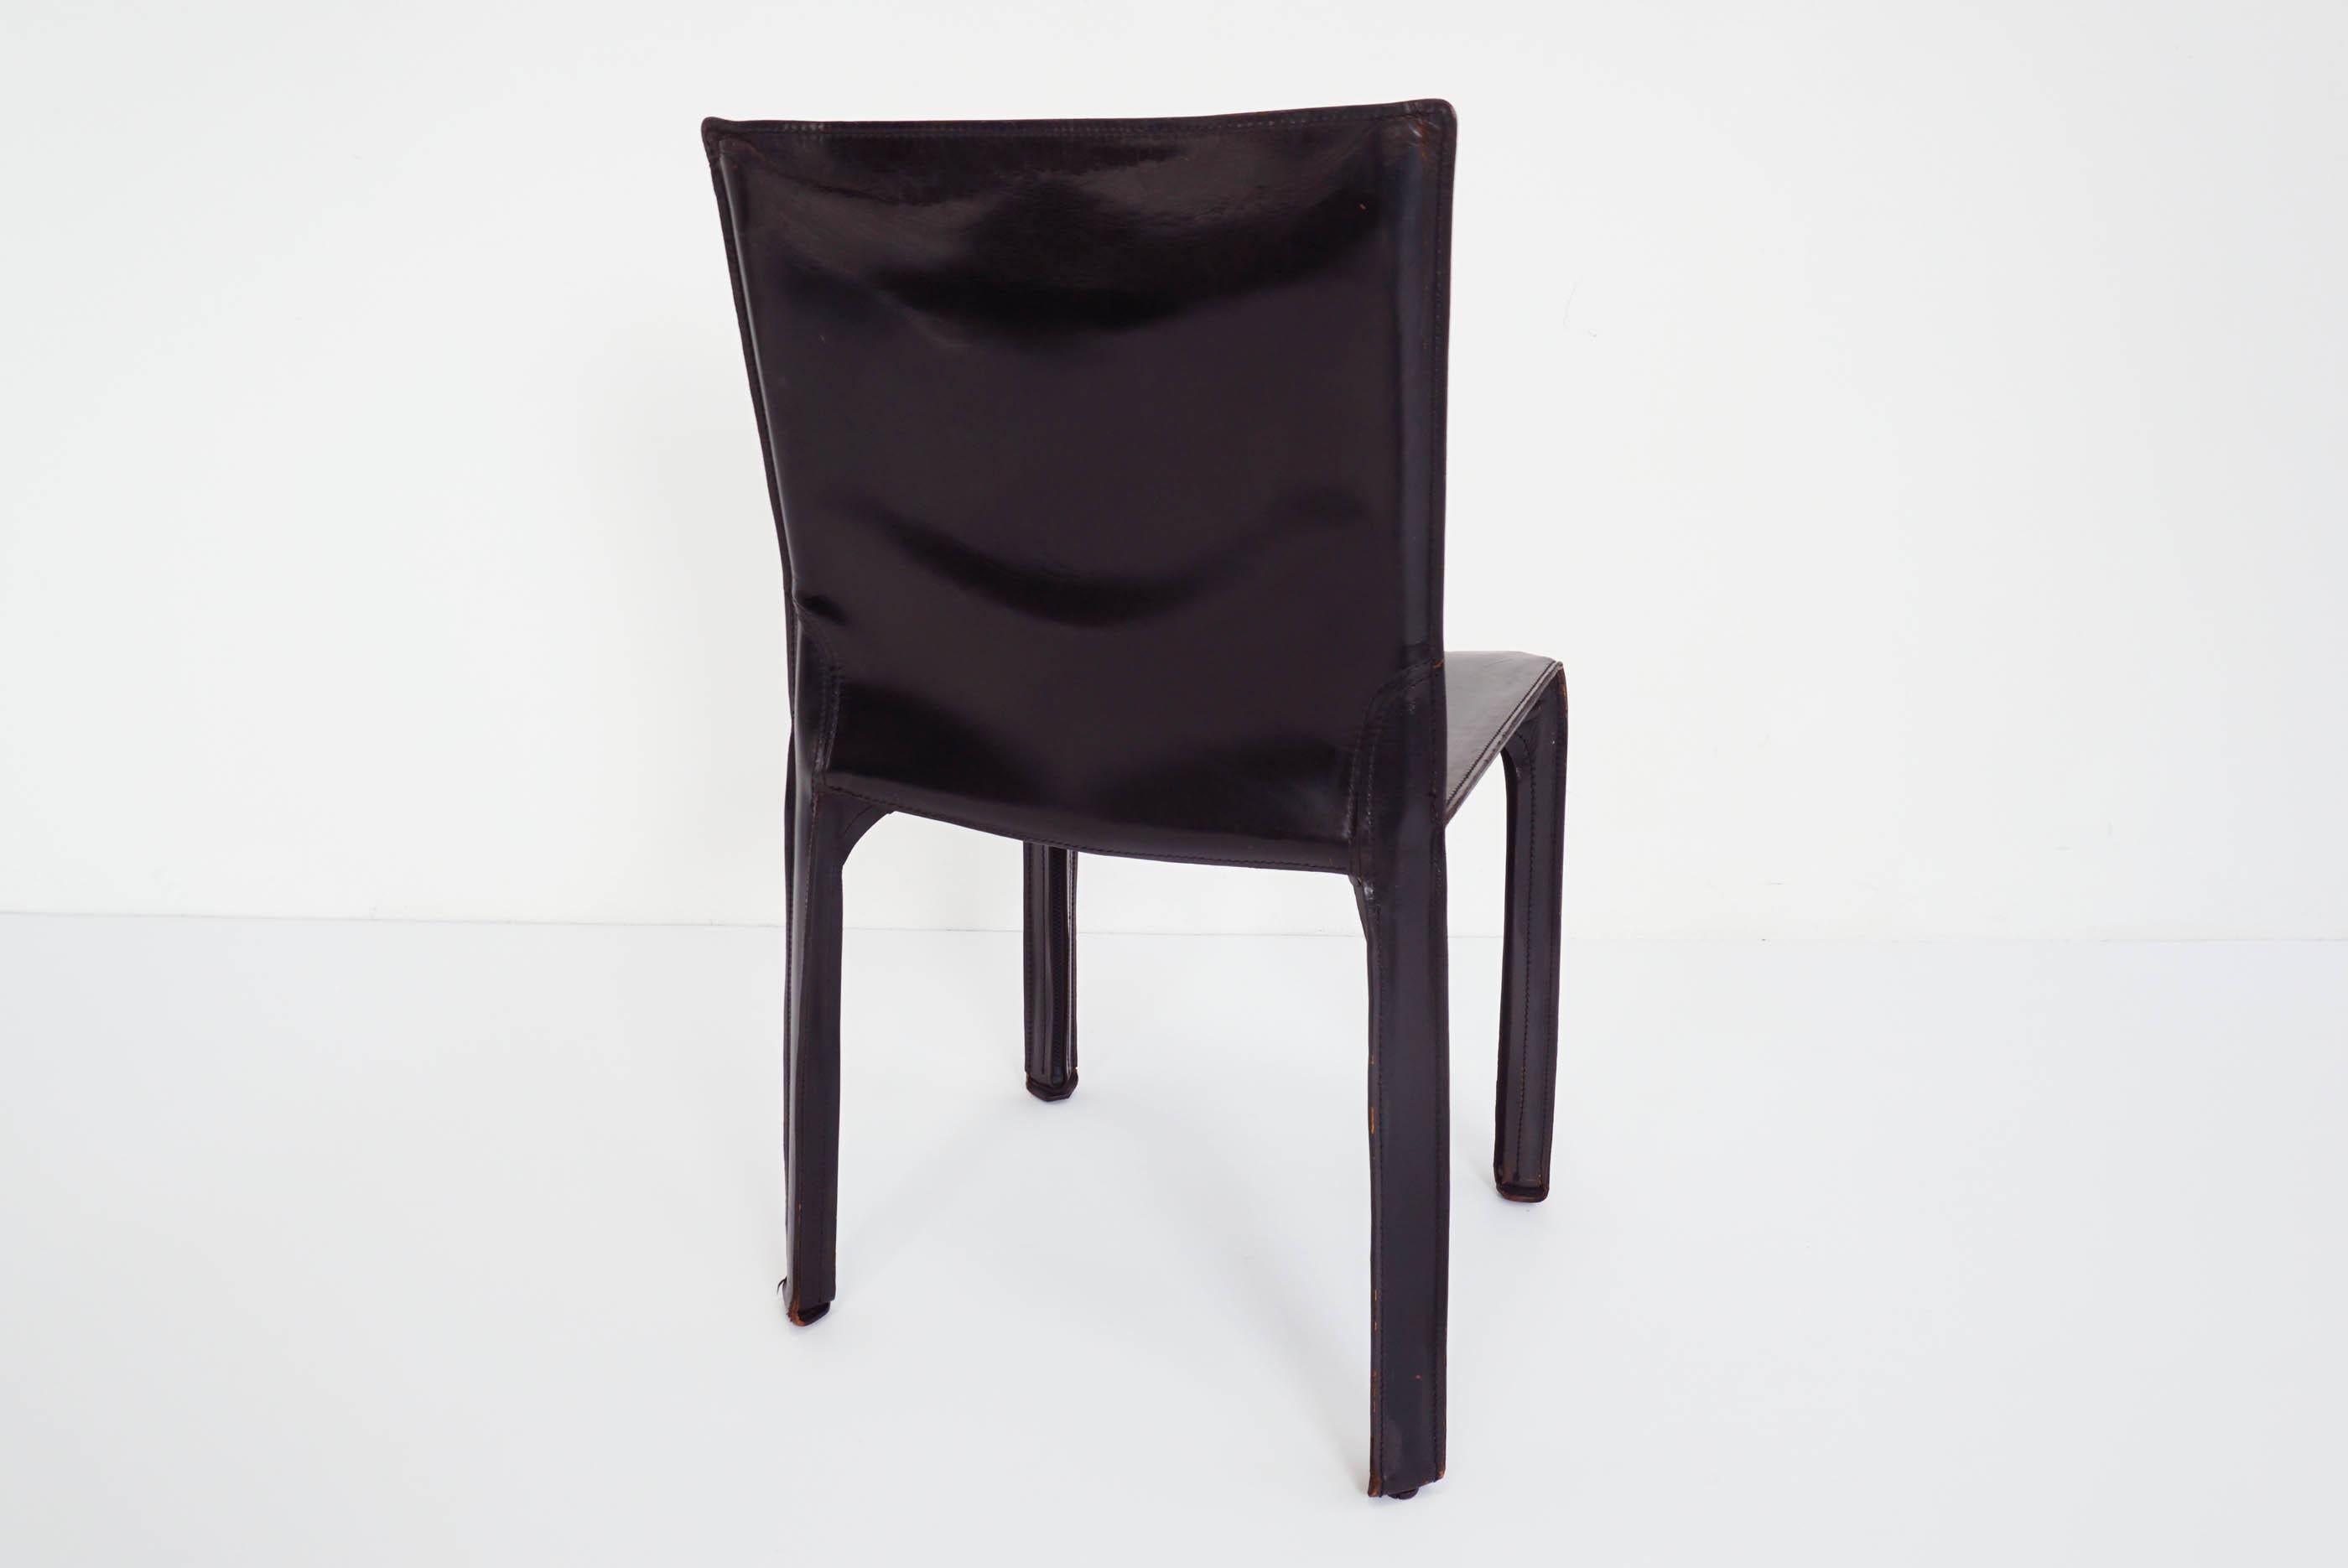 Late 20th Century Black Patina Leather Mario Bellini Cassina Set of 2 Chairs Mod. CAB 412, Italy For Sale